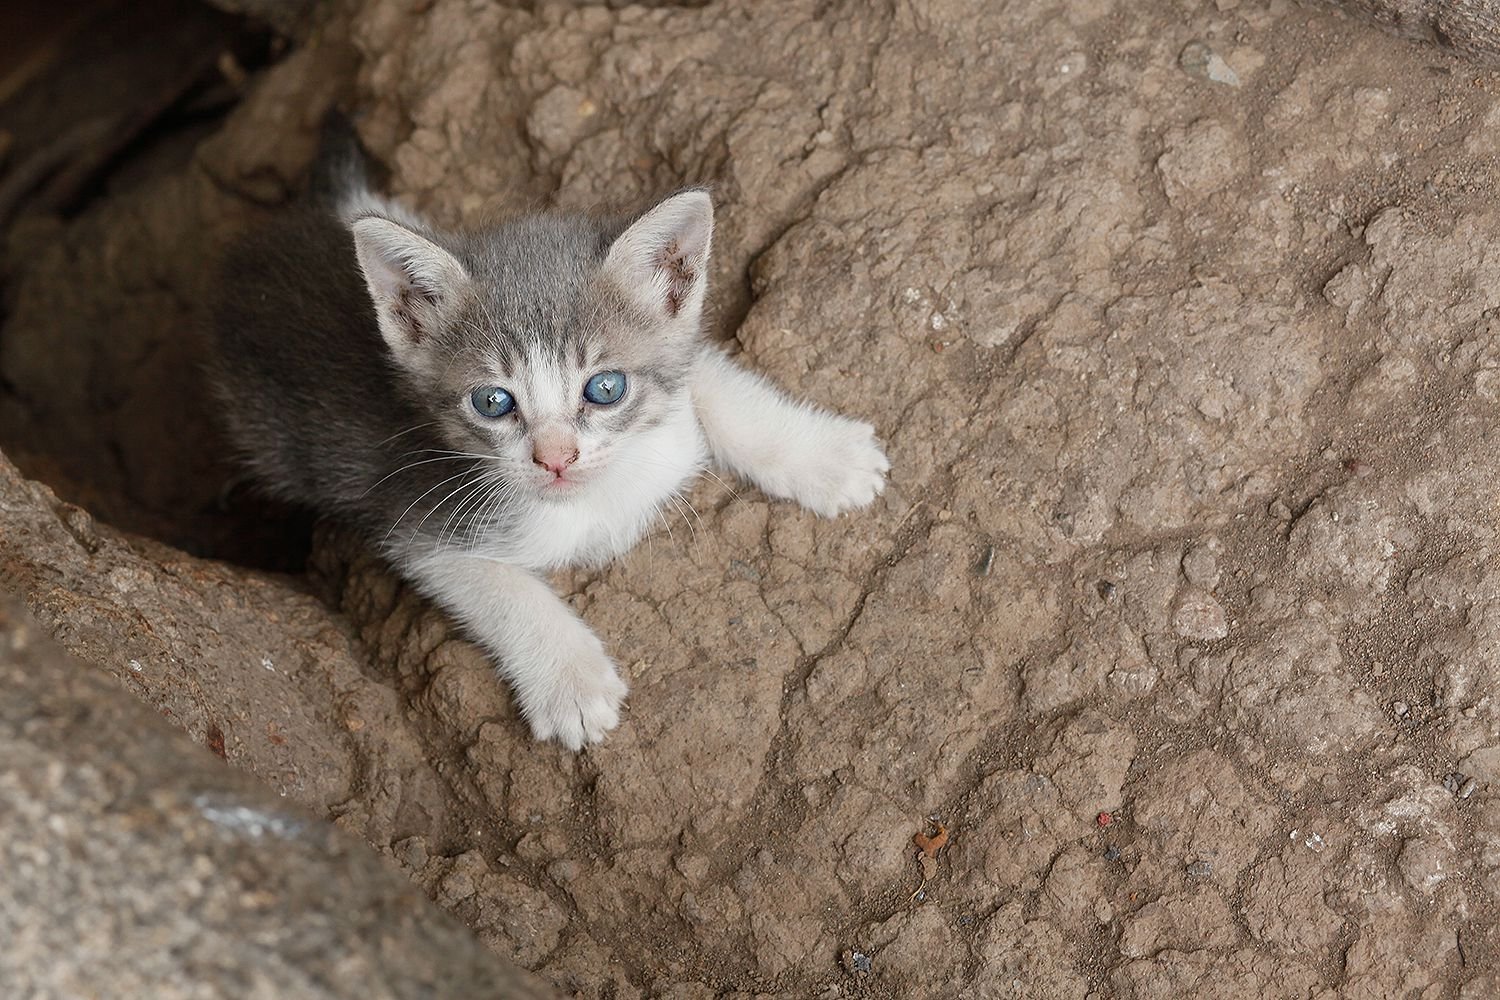 Heroic Firefighters in Turkey Rescue Cat Trapped for 48 Hours in a Pipe Under Concrete